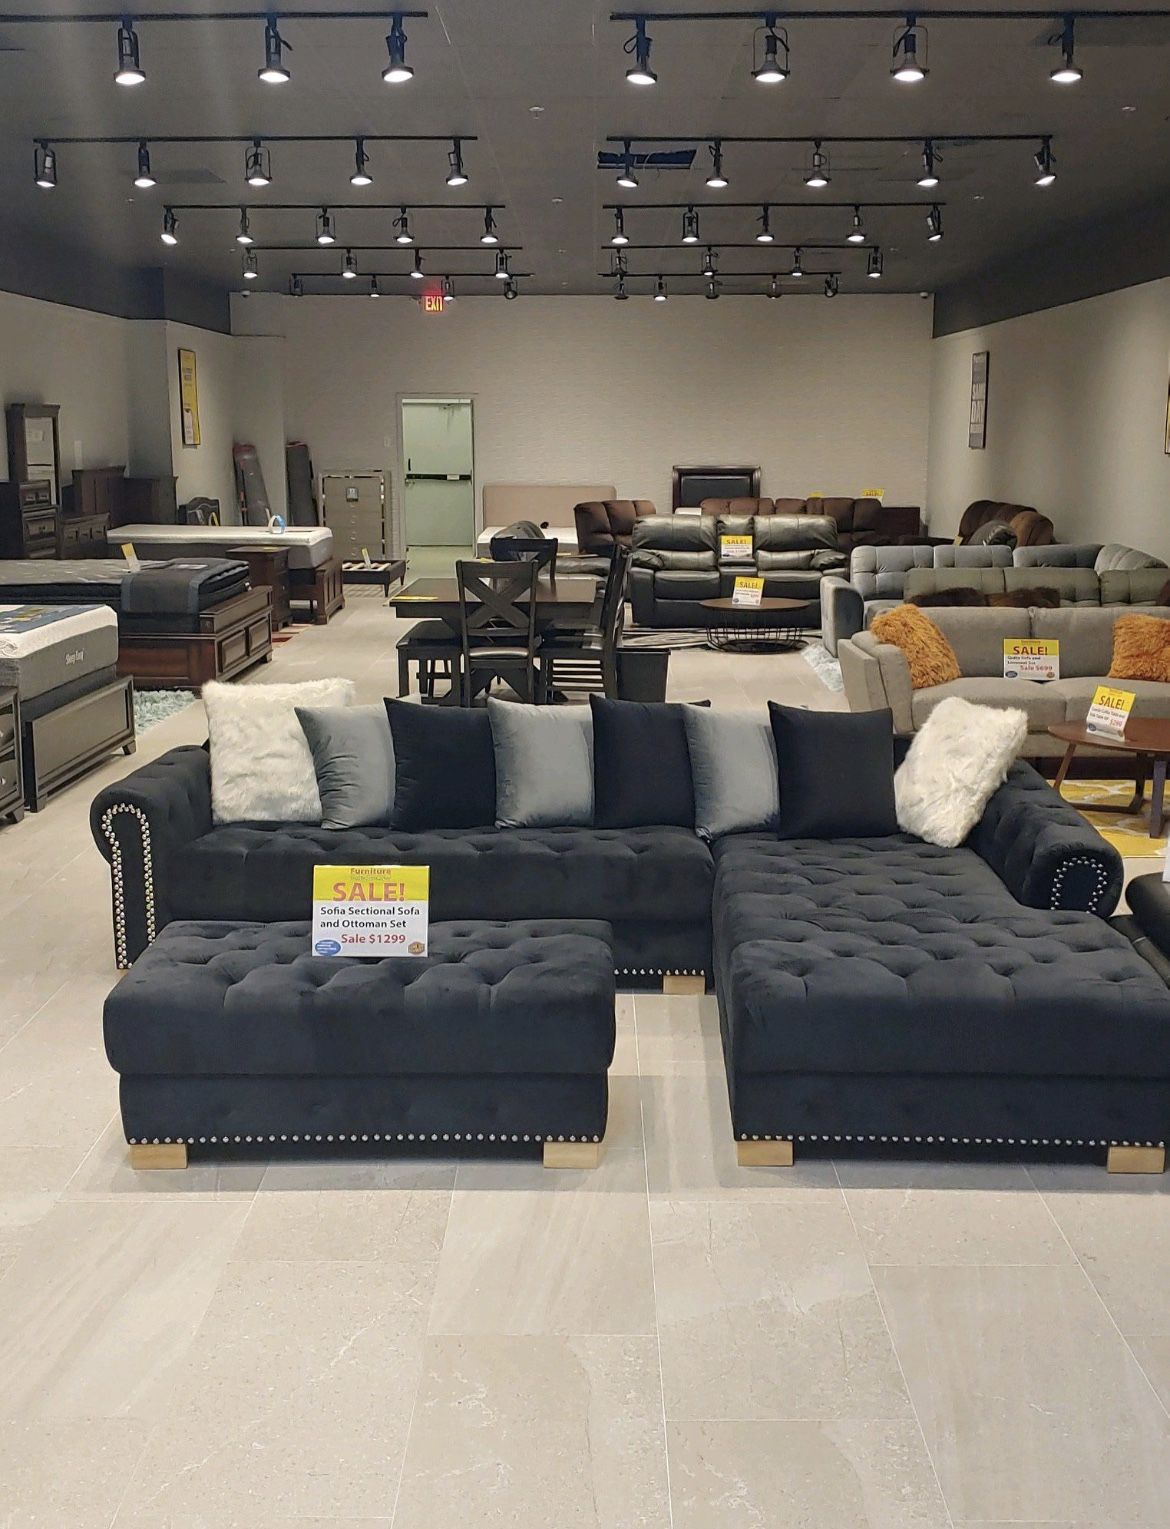 Sofia Black Velvet Sectional Sofa With Ottoman ** Ellenton Outlets ** No Credit Needed!